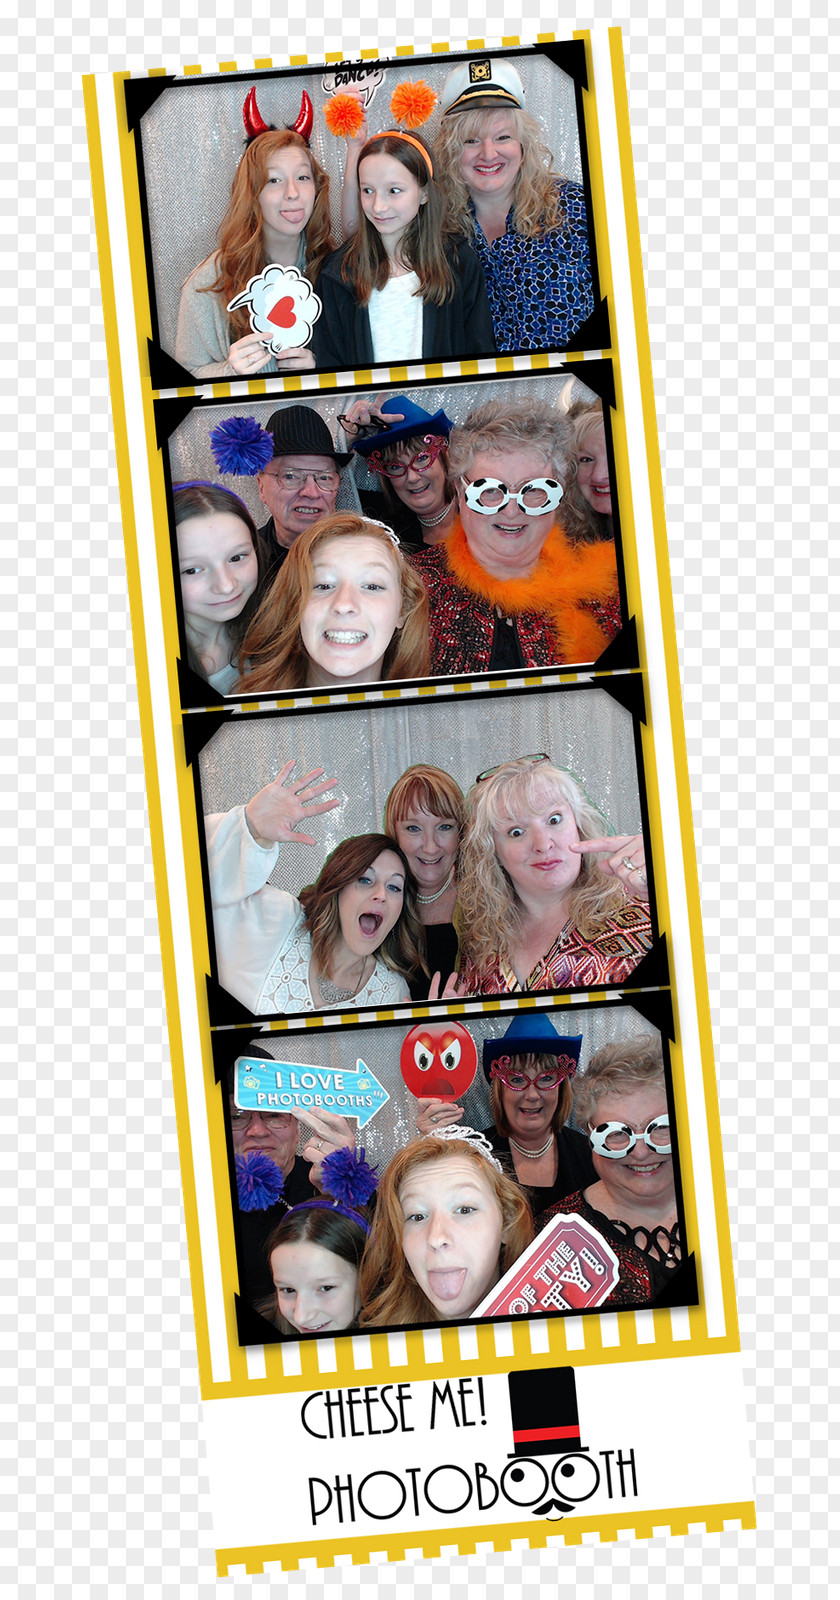 Cheese Me! Photo Booth Collage Poster PNG